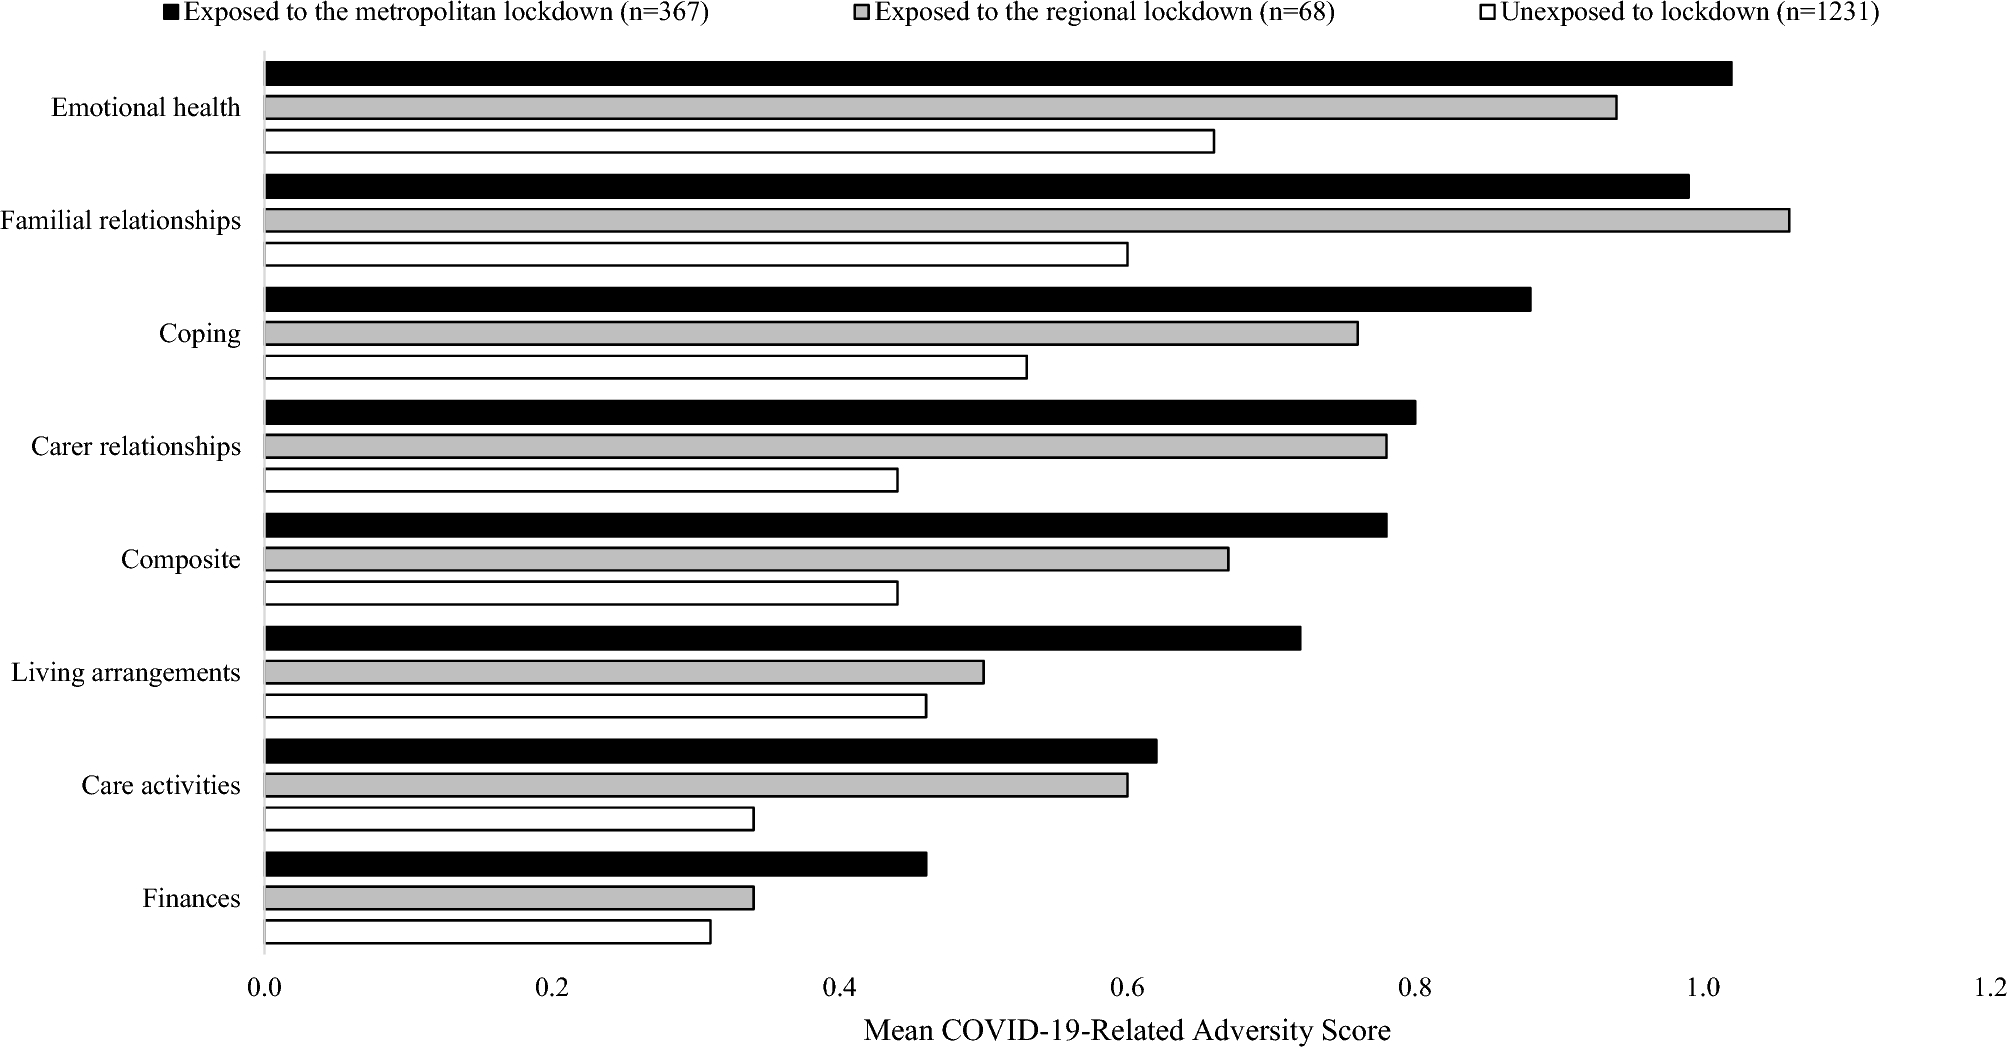 The quality of life impact of the COVID-19 pandemic and lockdowns for people living with multiple sclerosis (MS): evidence from the Australian MS Longitudinal Study